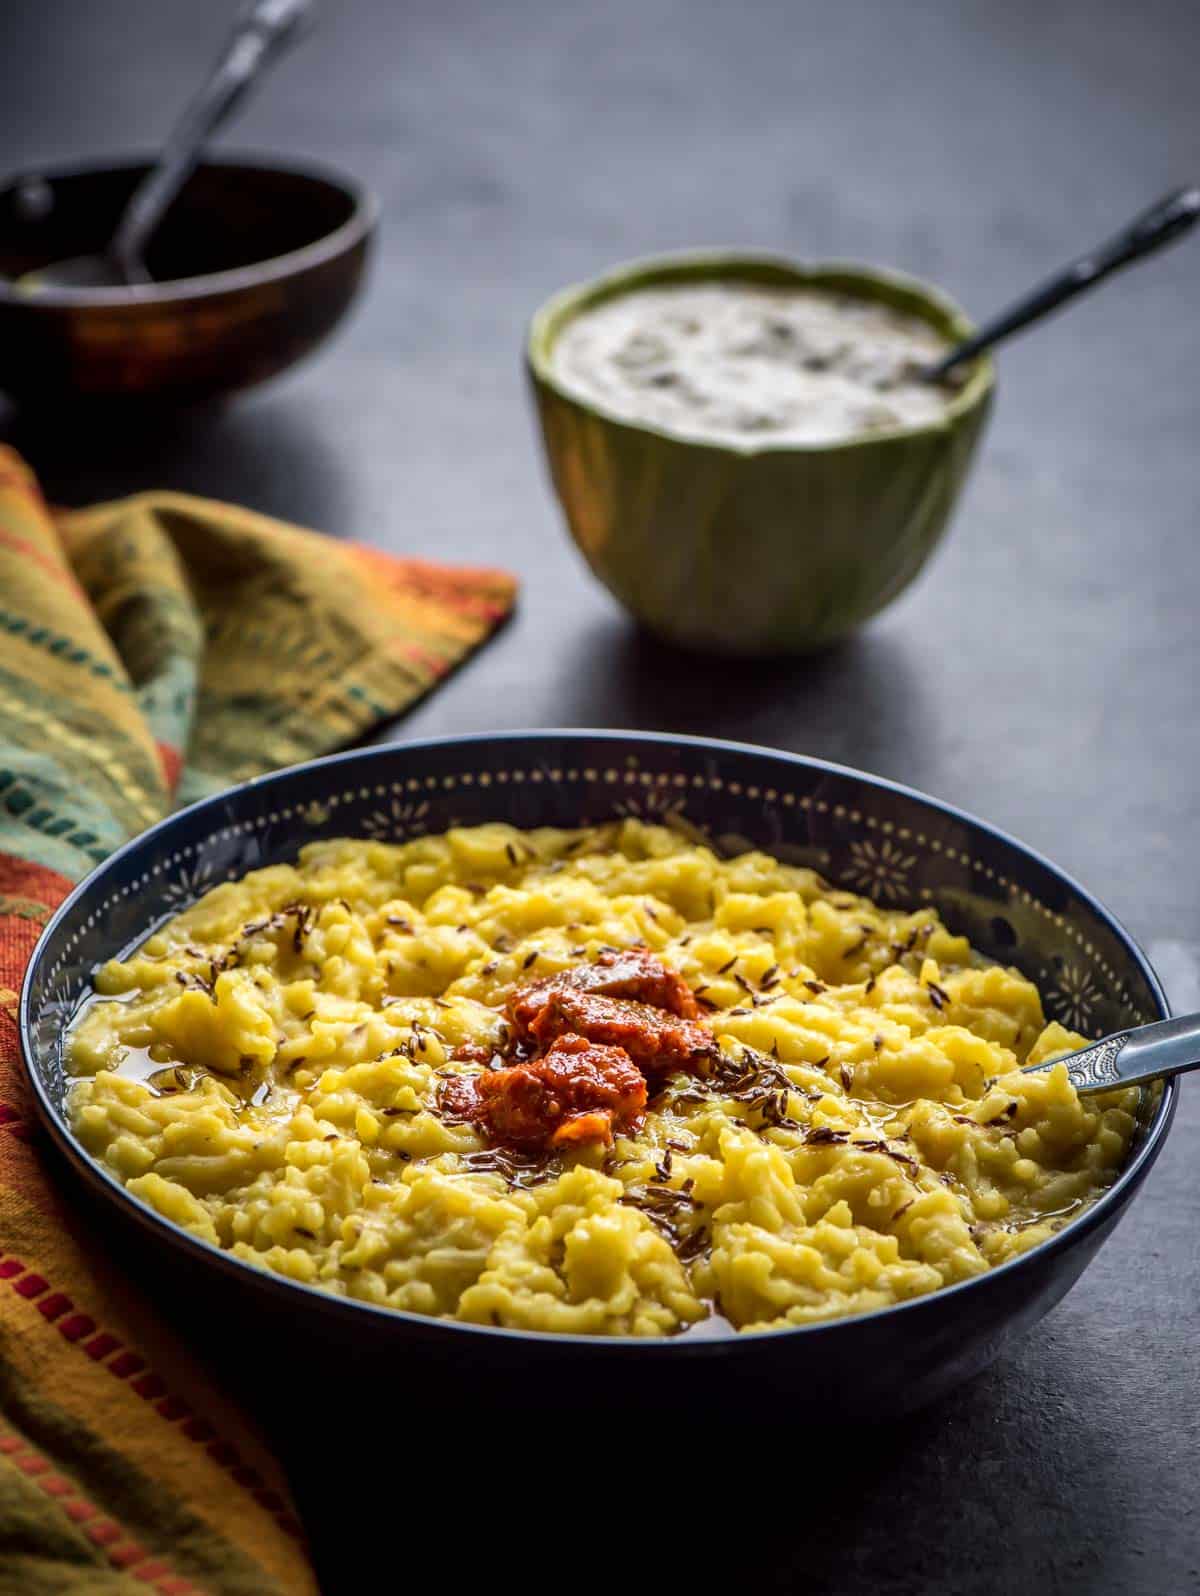 A wholesome and nutritious meal -  Moong dal khichdi made from rice and split lentils is comfort food at its best. This one-pot, 5-ingredient meal is easy on your stomach and is perfect for all ages.